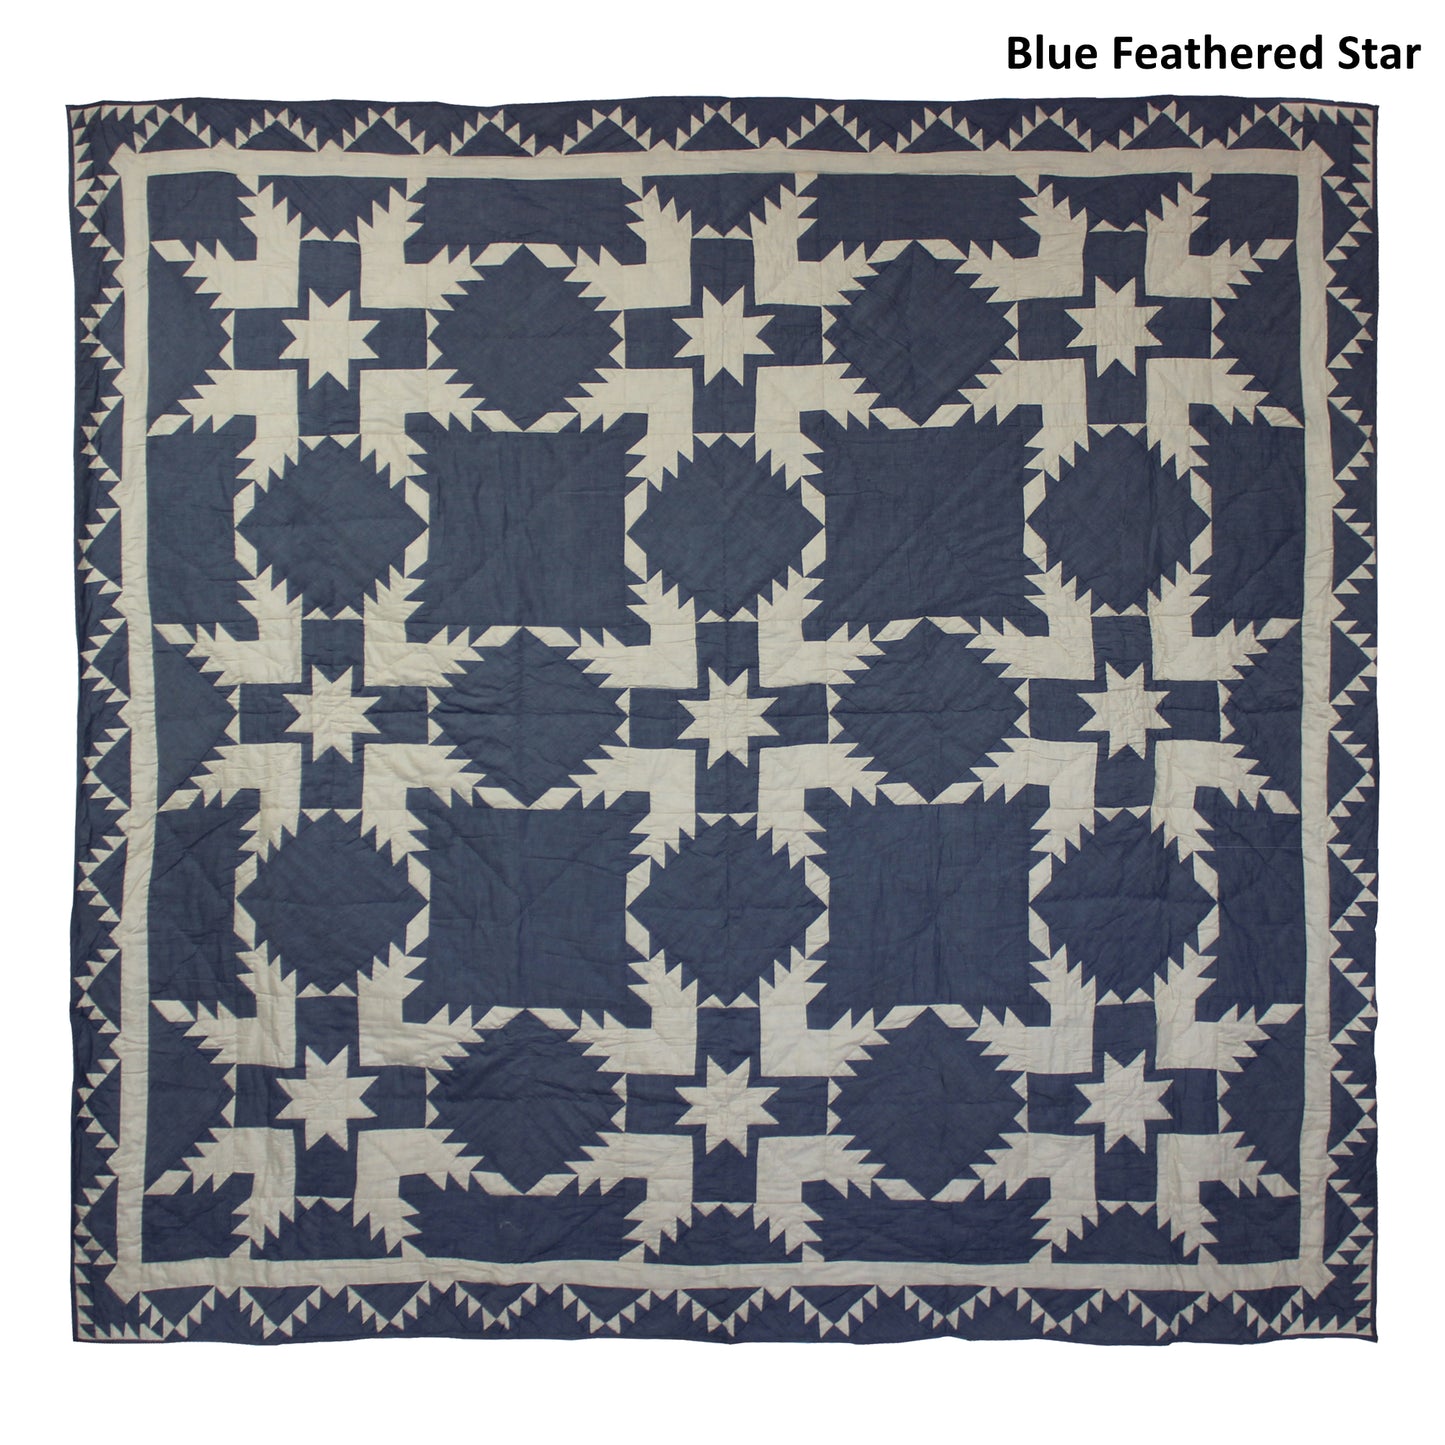 Blue Feathered Star/Feathered Star Quilt, Hand cut and Patchwork cotton fabric blocks.